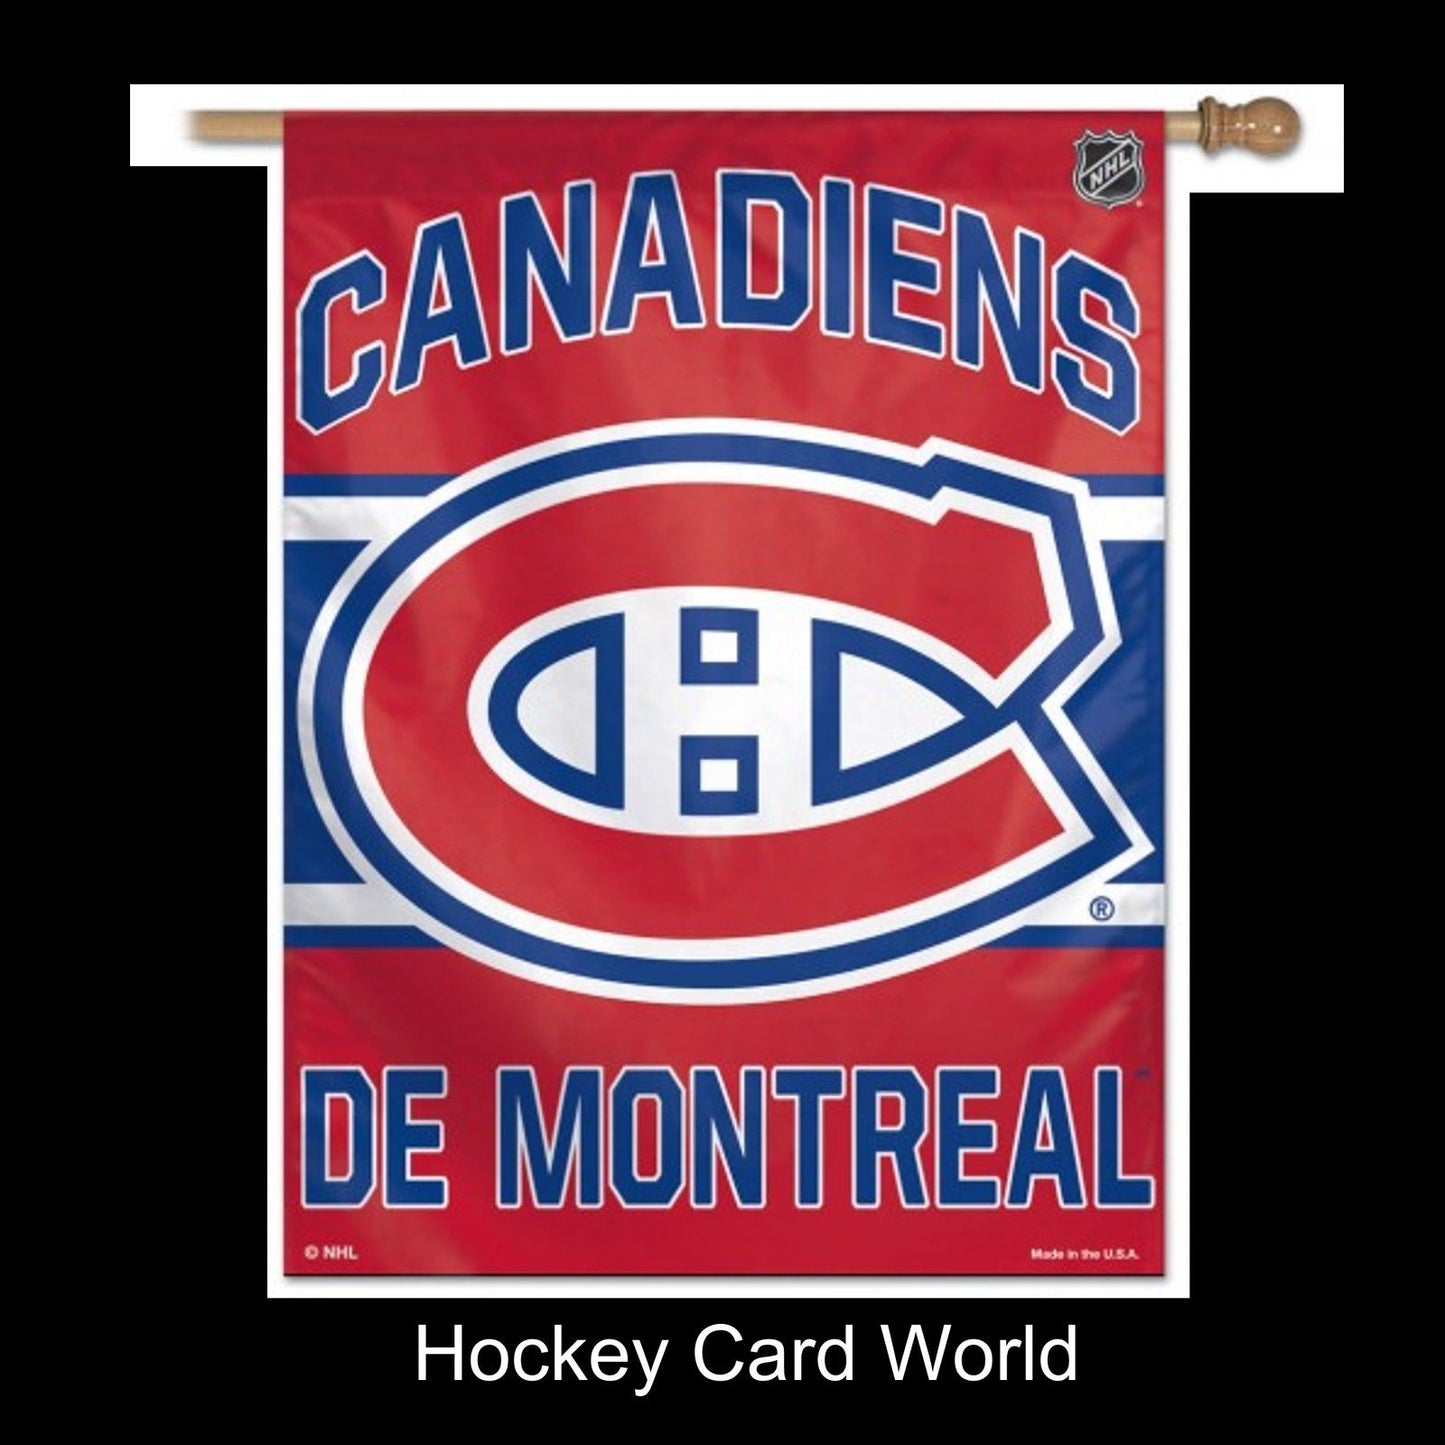  Montreal Canadiens Licensed Vertical Flag 27" x 37" Inside Outside  Image 1